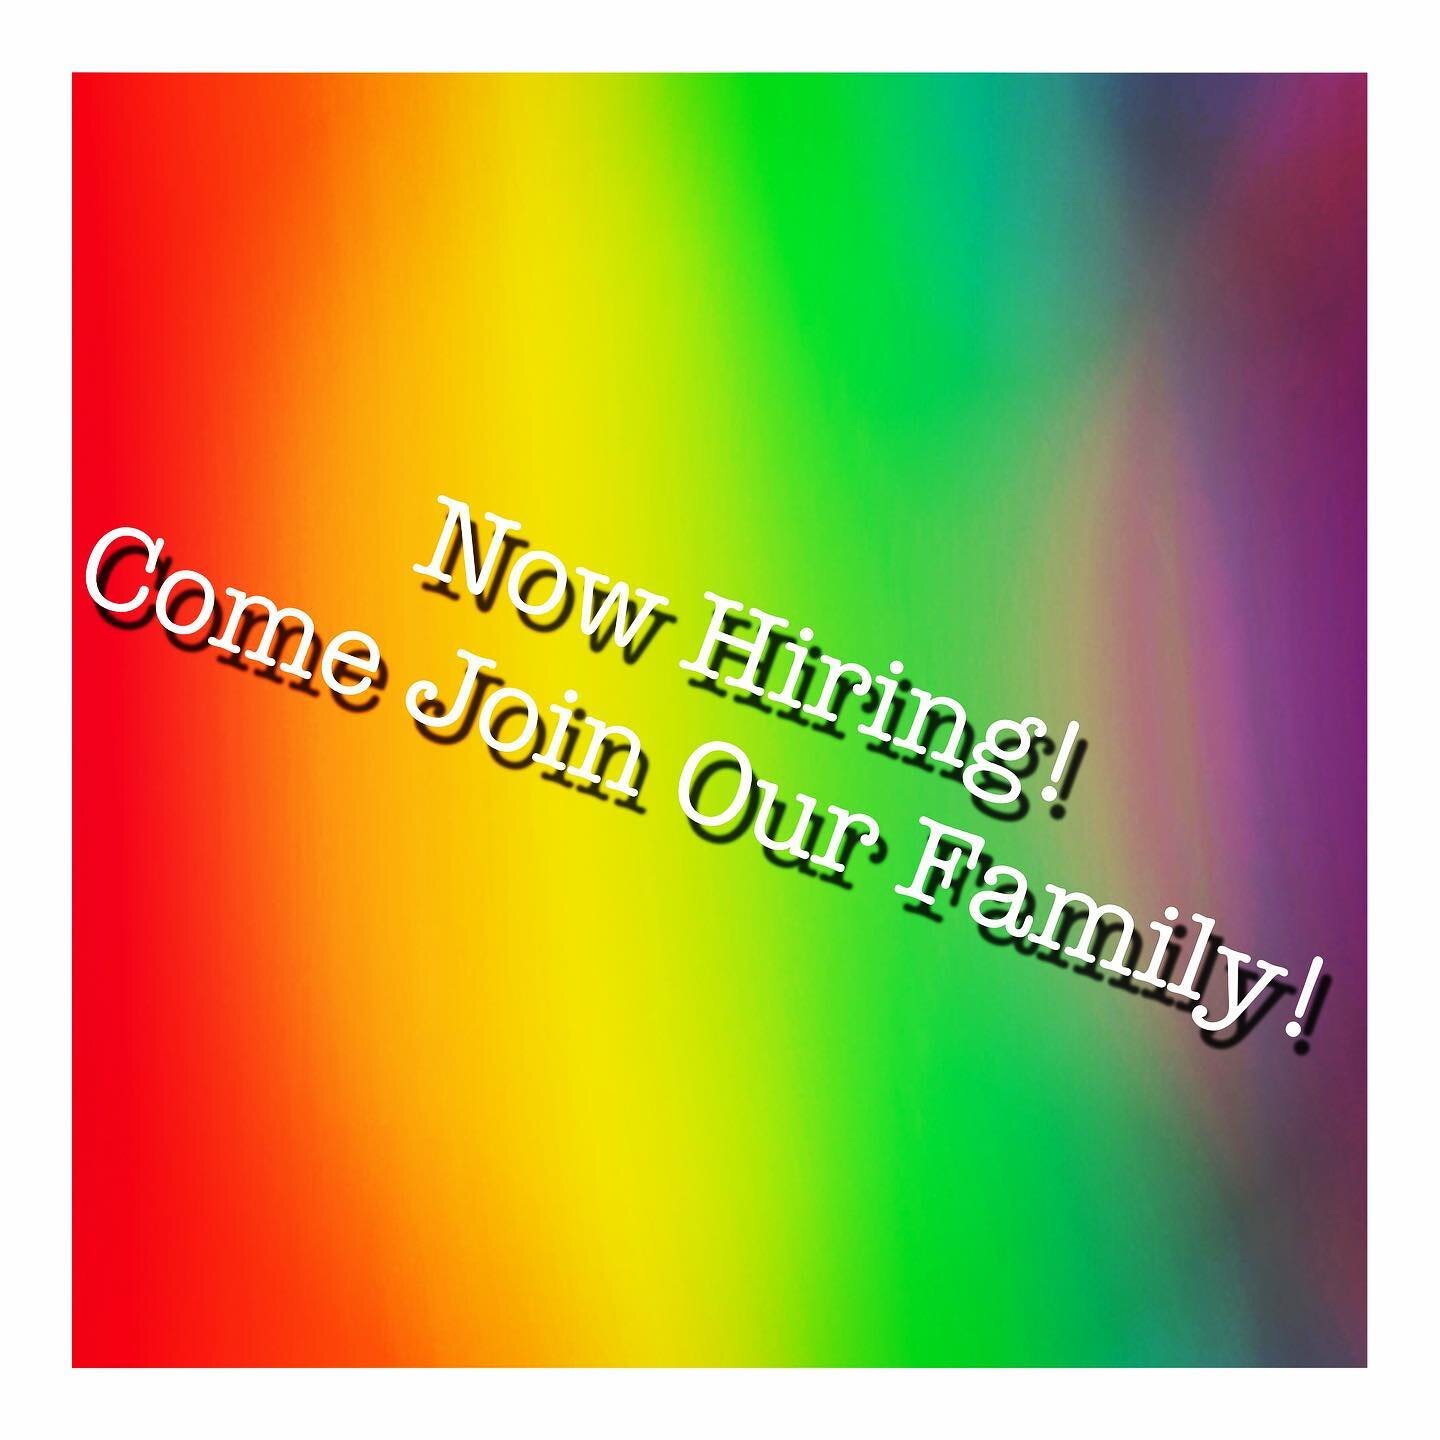 Fill an application online or apply in person! #hiring #familyatmosphere